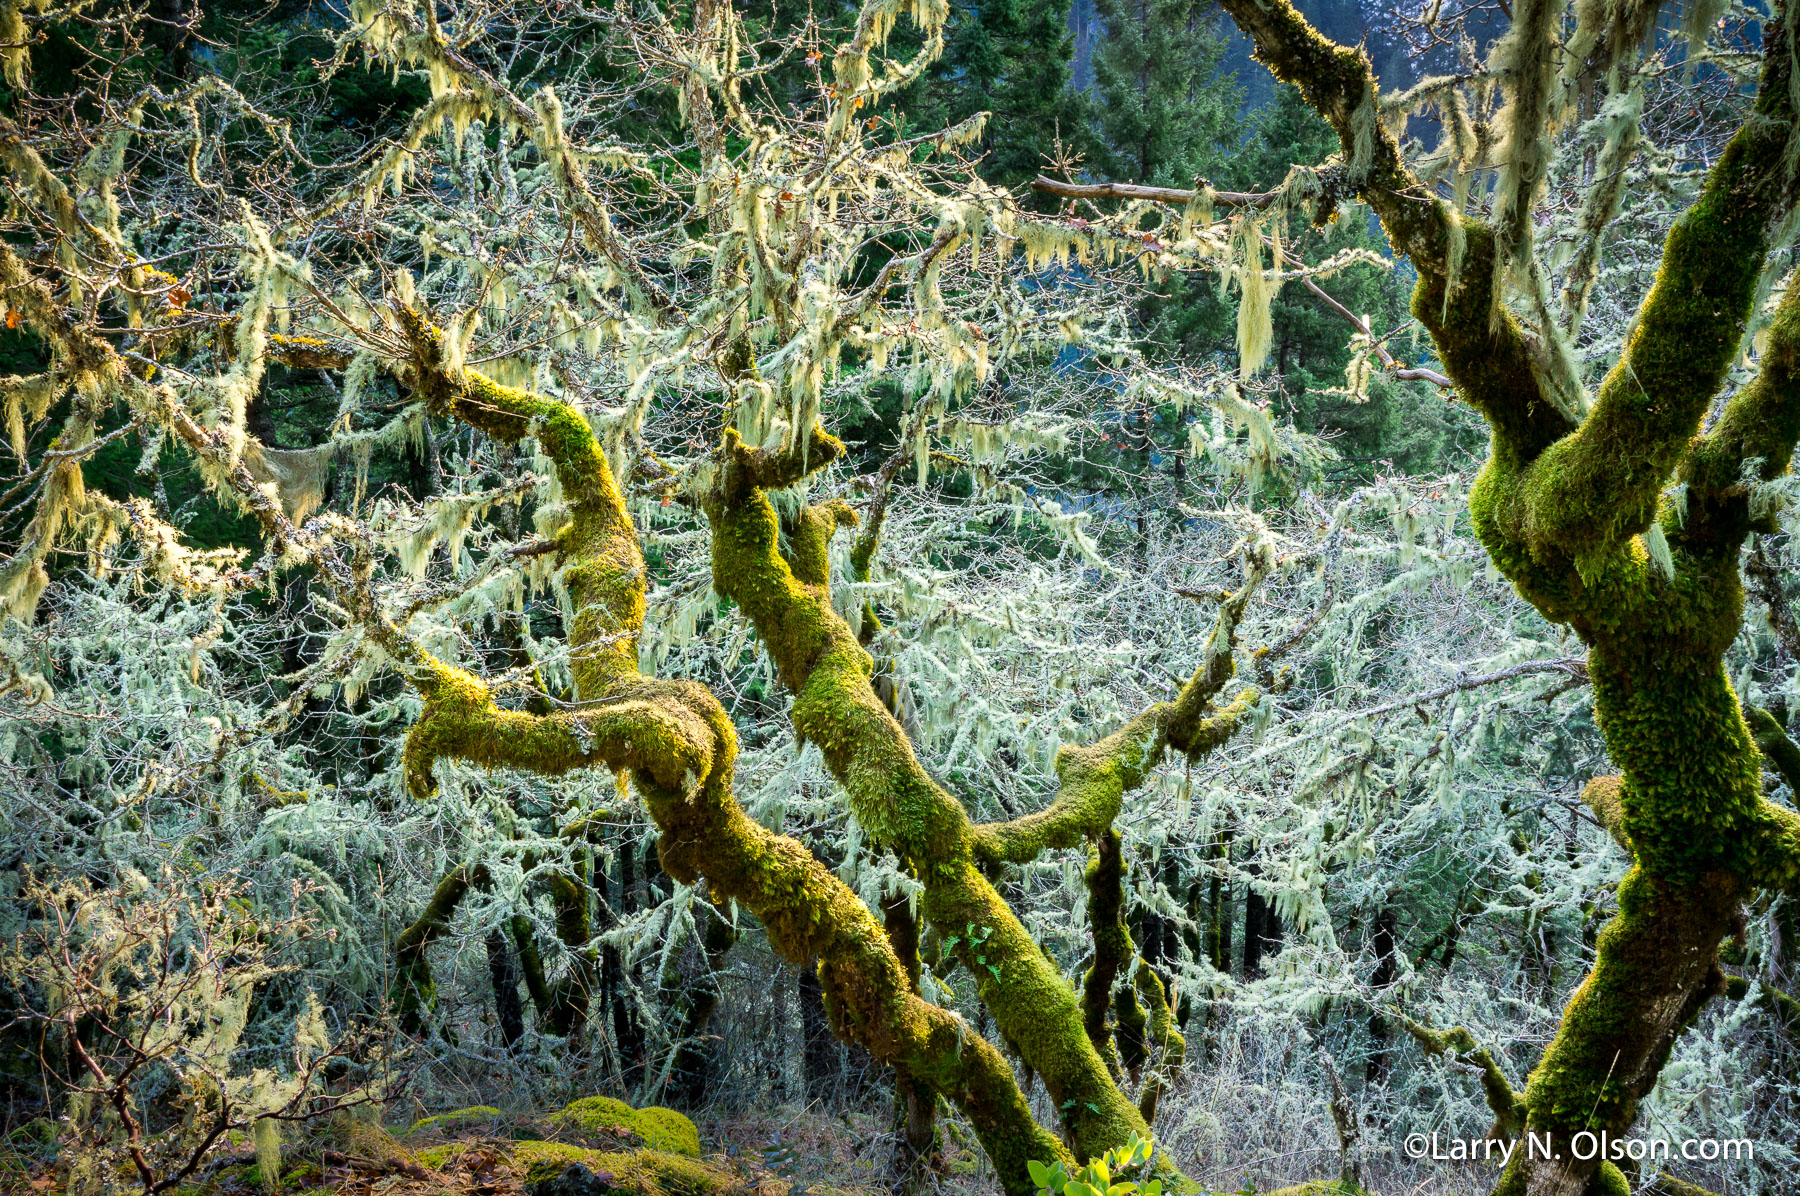 Oaks, LIchen and Frost, Columbia River Gorge, OR | Rime ice coats the "old mans Beard", a lichen covering these twisted oaks in the Columbia River Gorge.